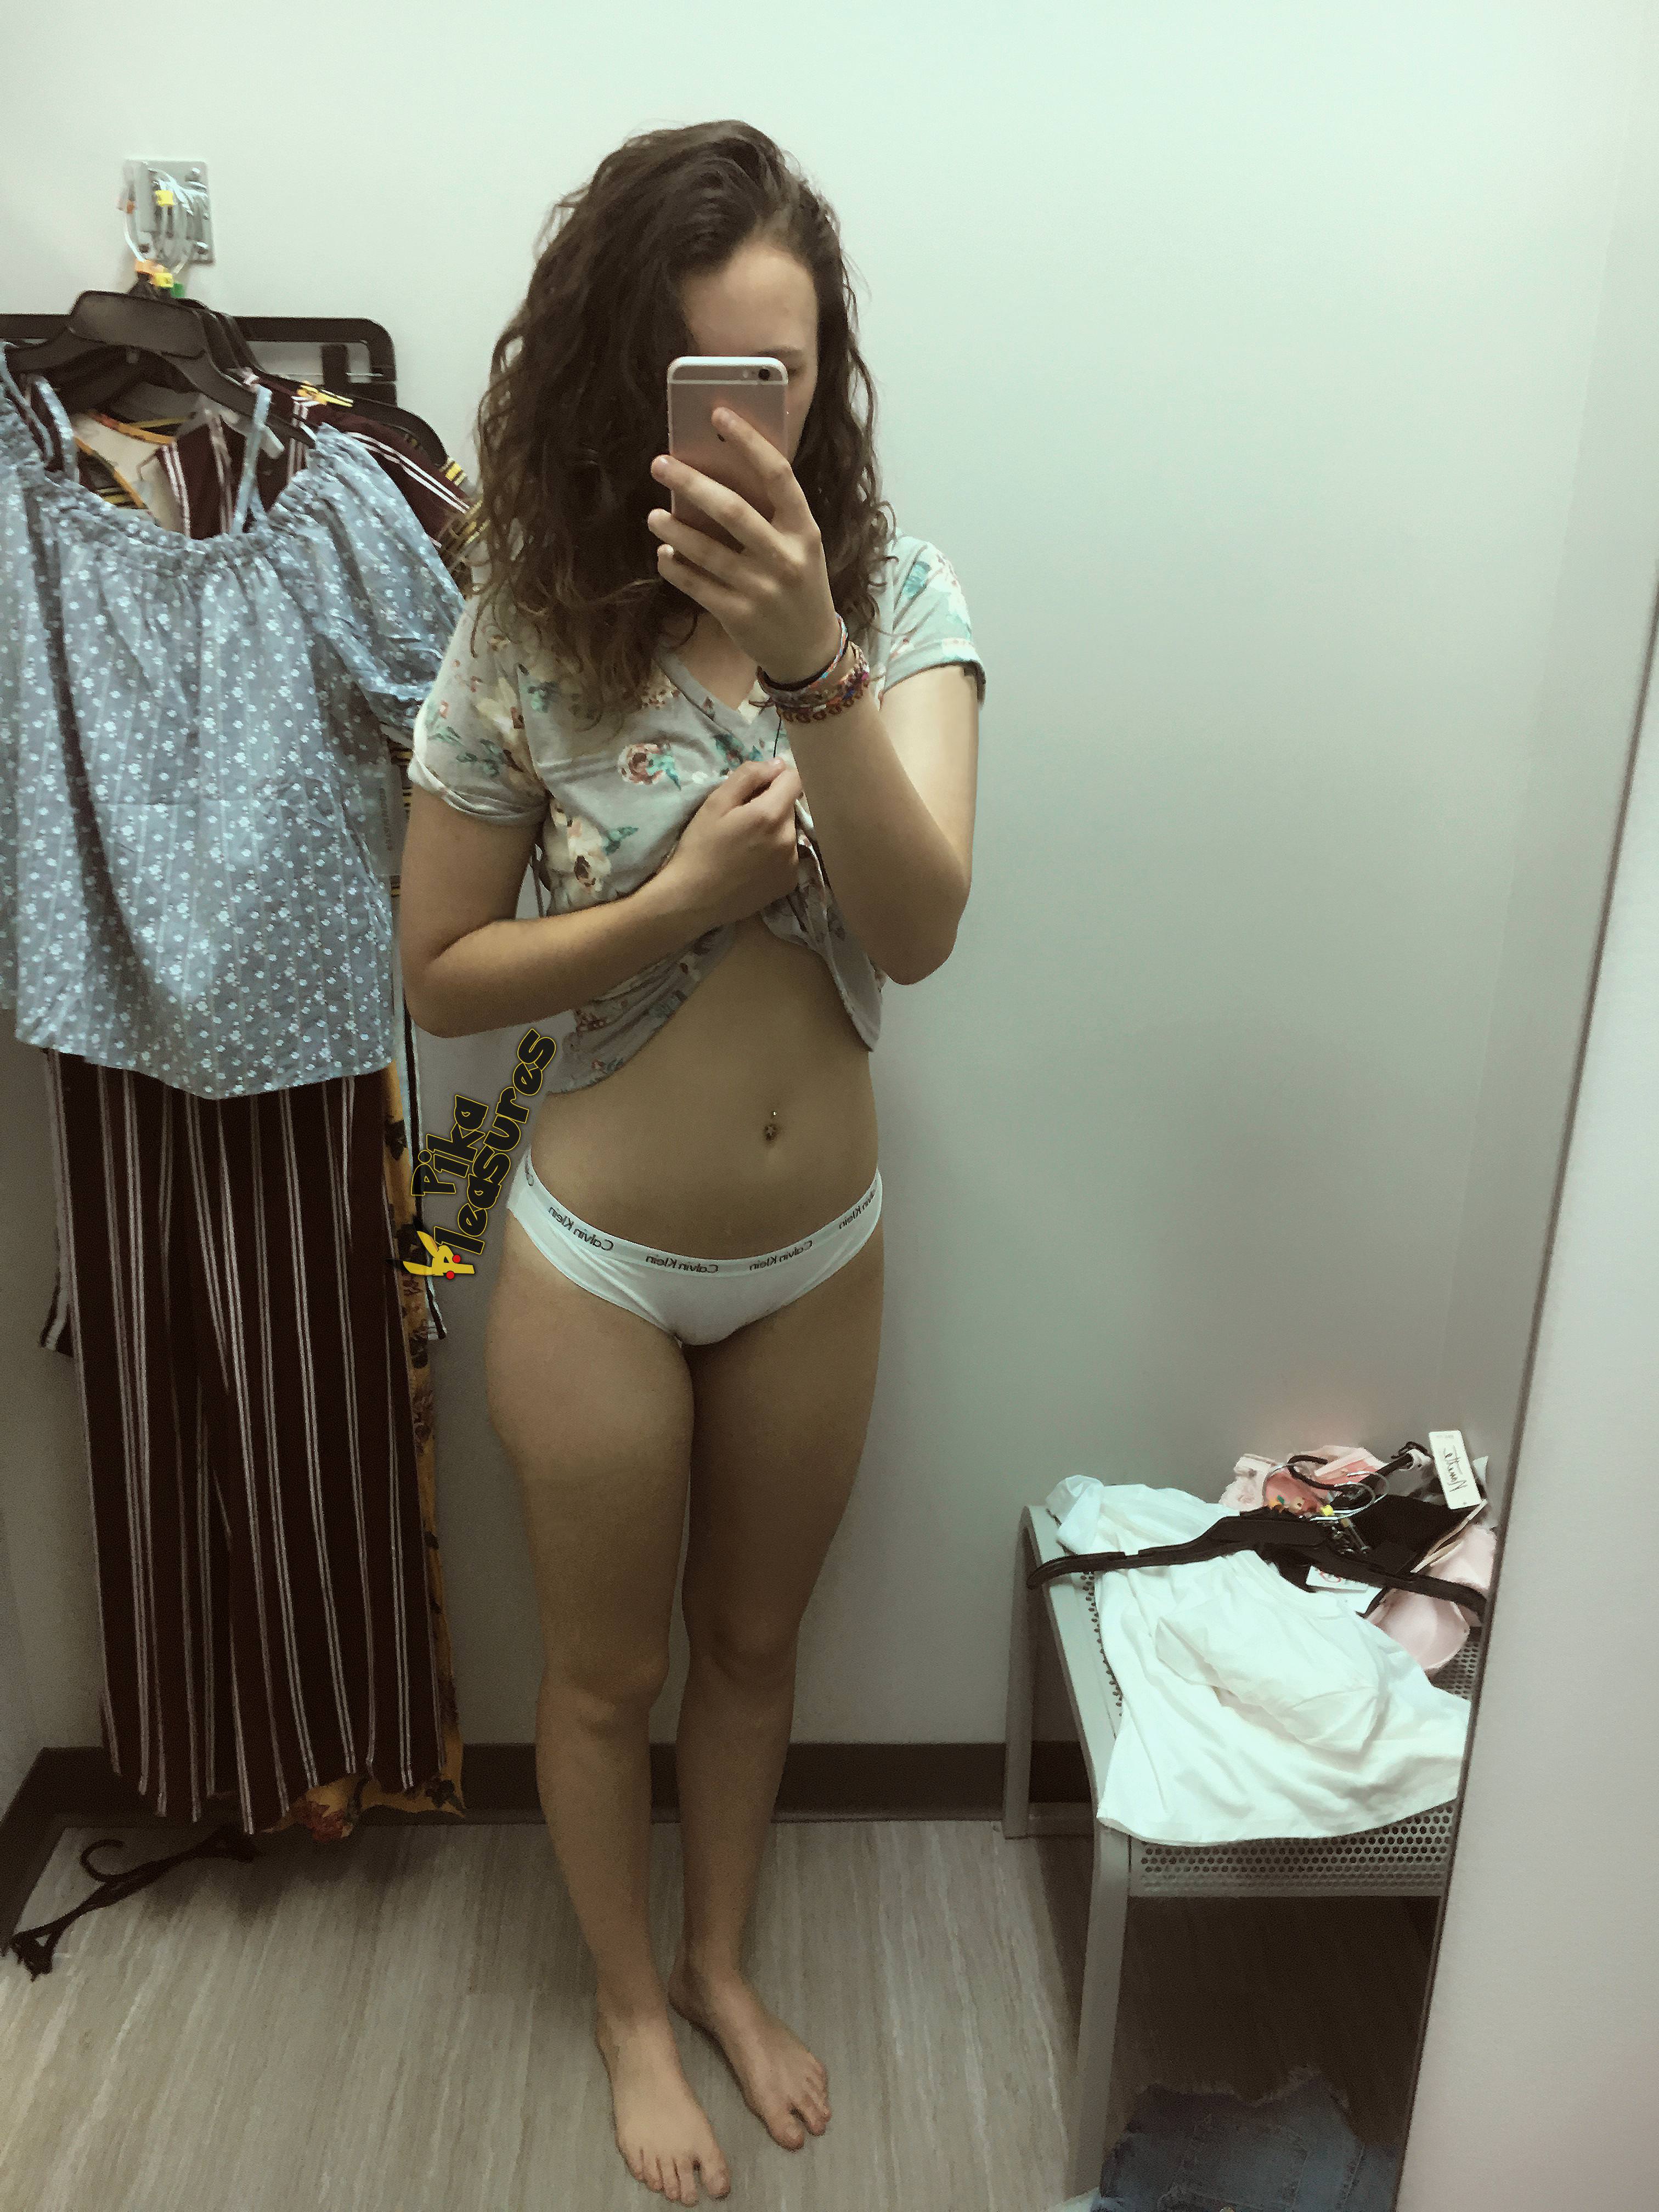 Amateur in dressing room tries on white undies showing tits